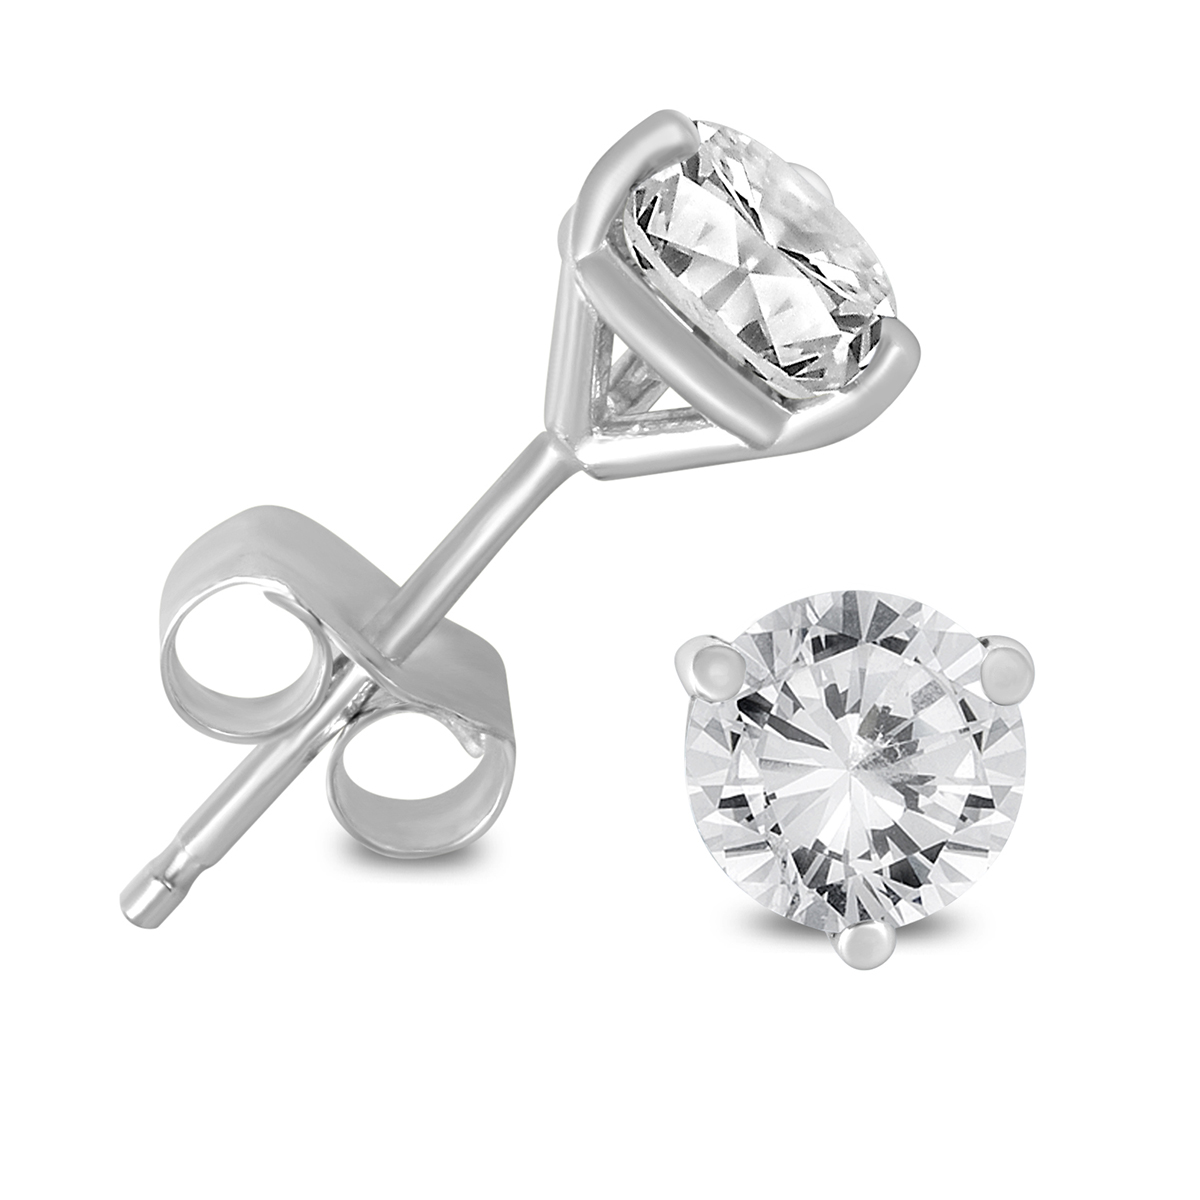 1 Carat TW AGS Certified Martini Set Round Diamond Solitaire Earrings in 14K White Gold